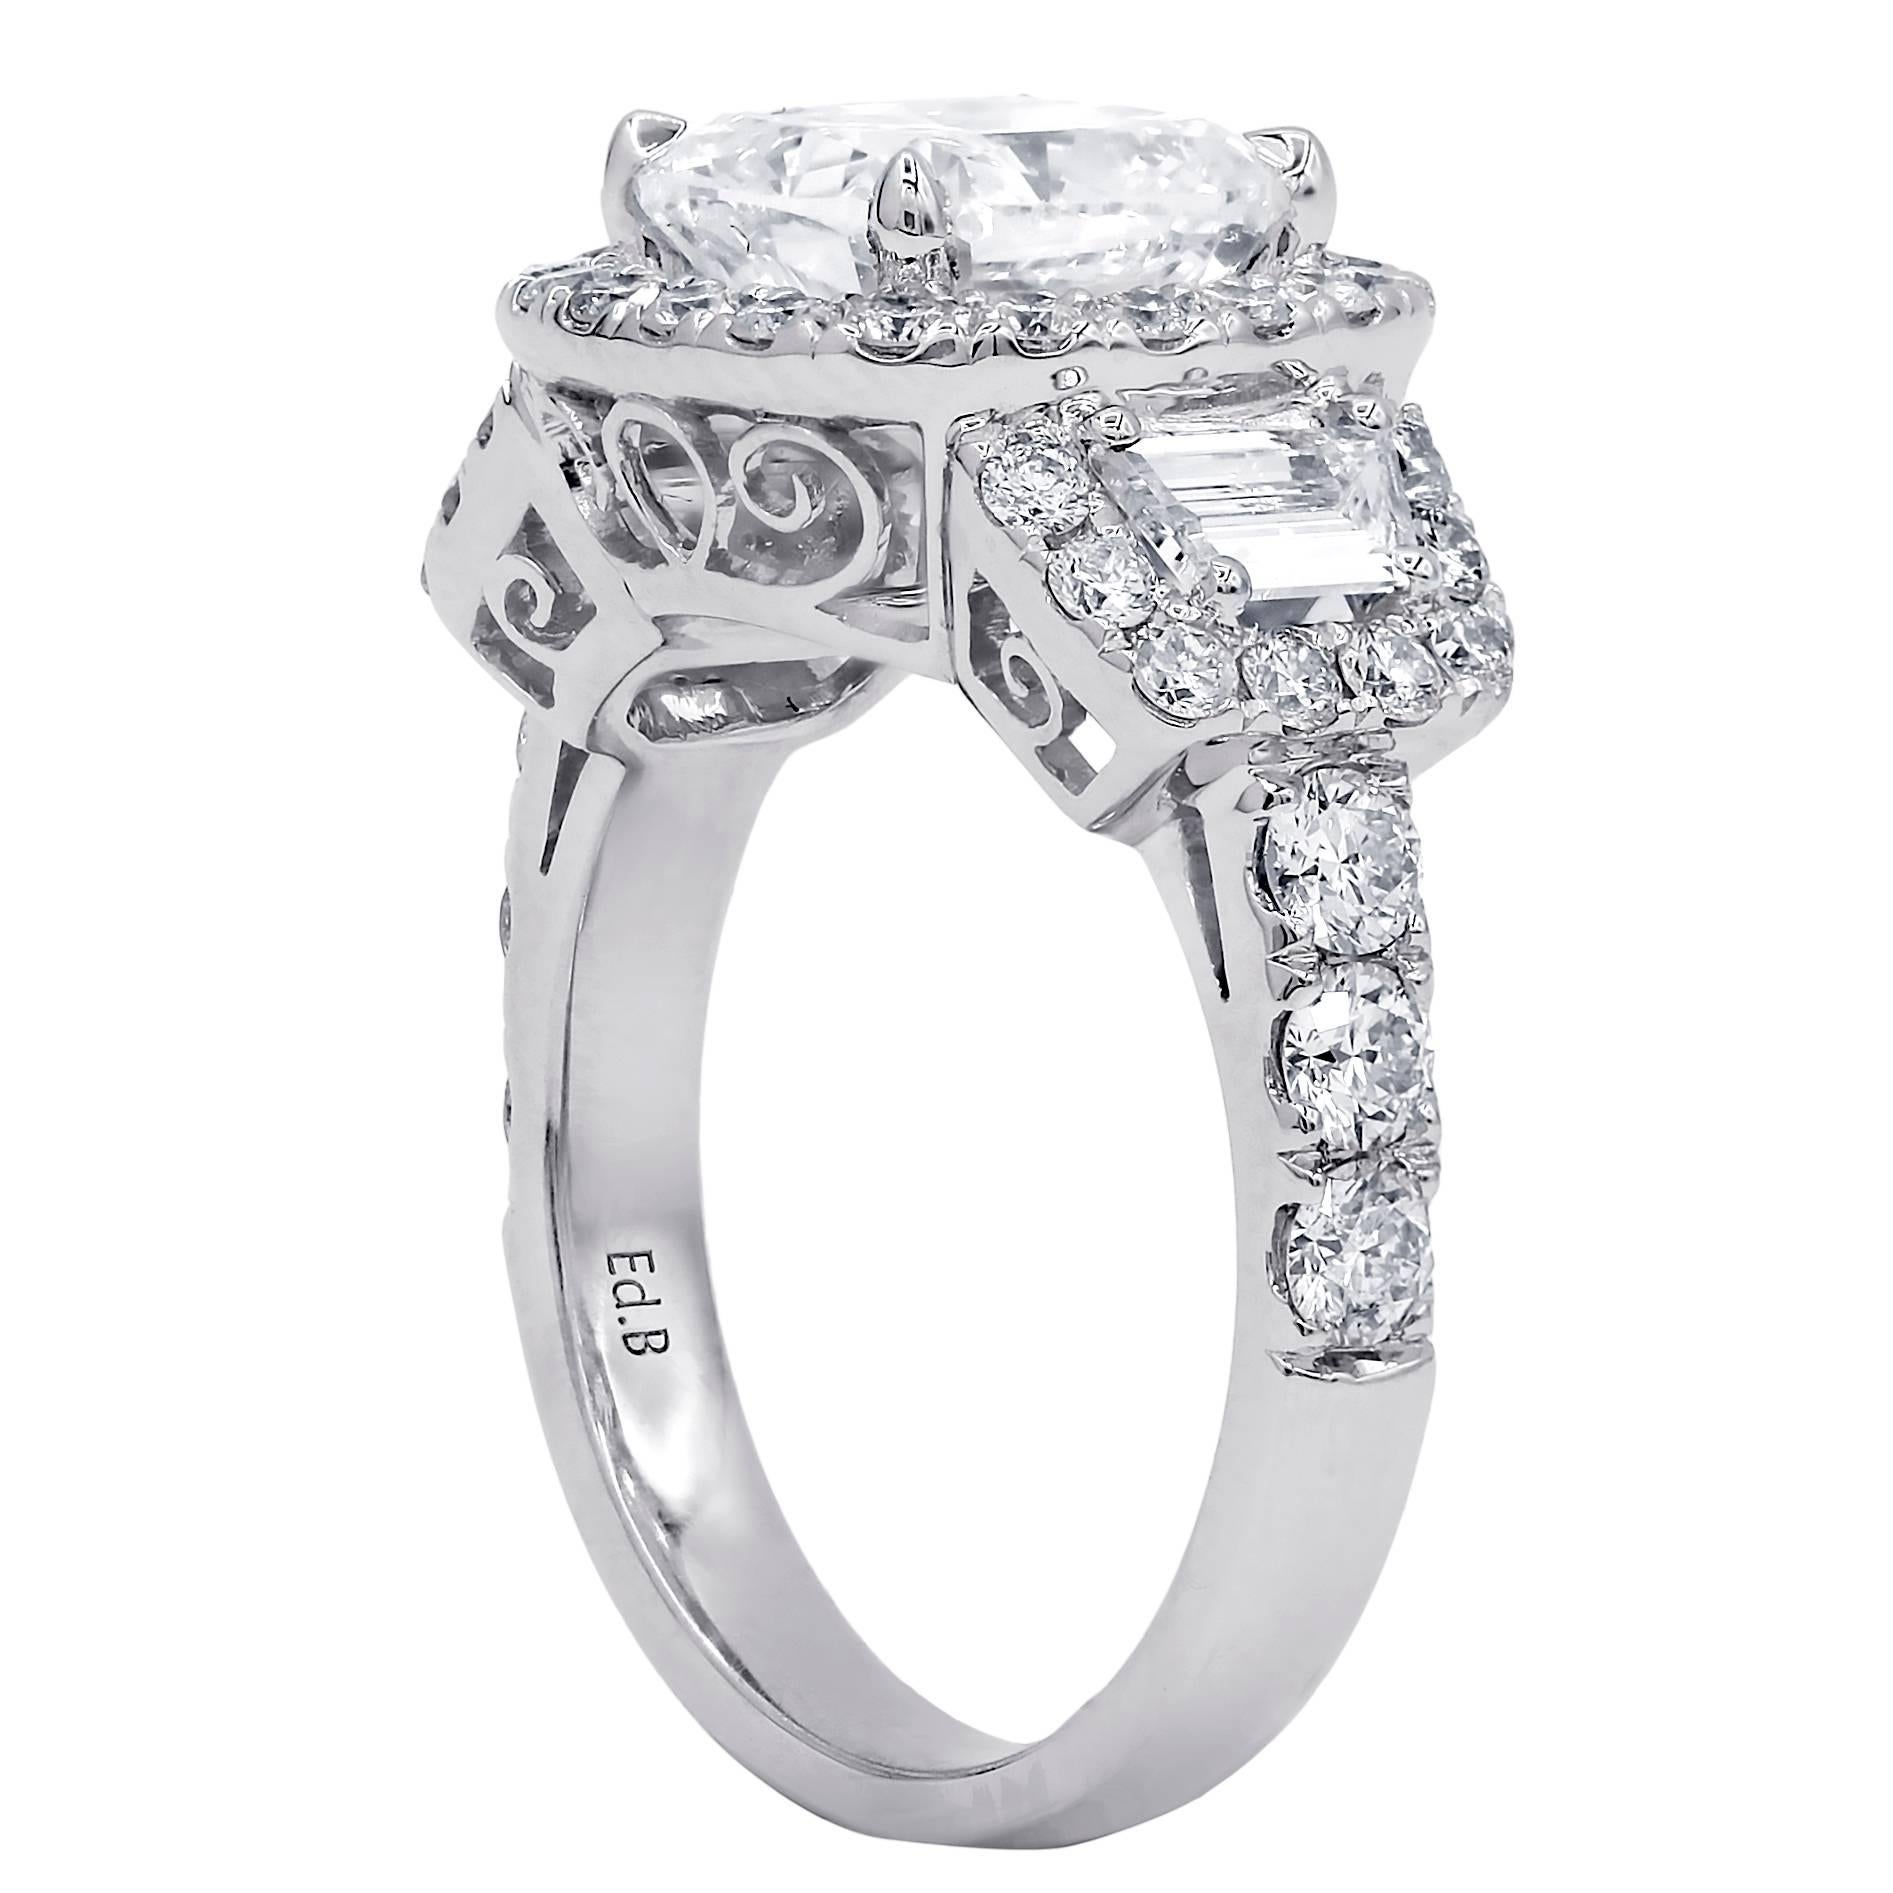 18kt white gold engagement ring with GIA certified 3.02 H-SI2 cushion cut diamond set with two trapezoids diamonds into halo like setting, feature 1.70ct